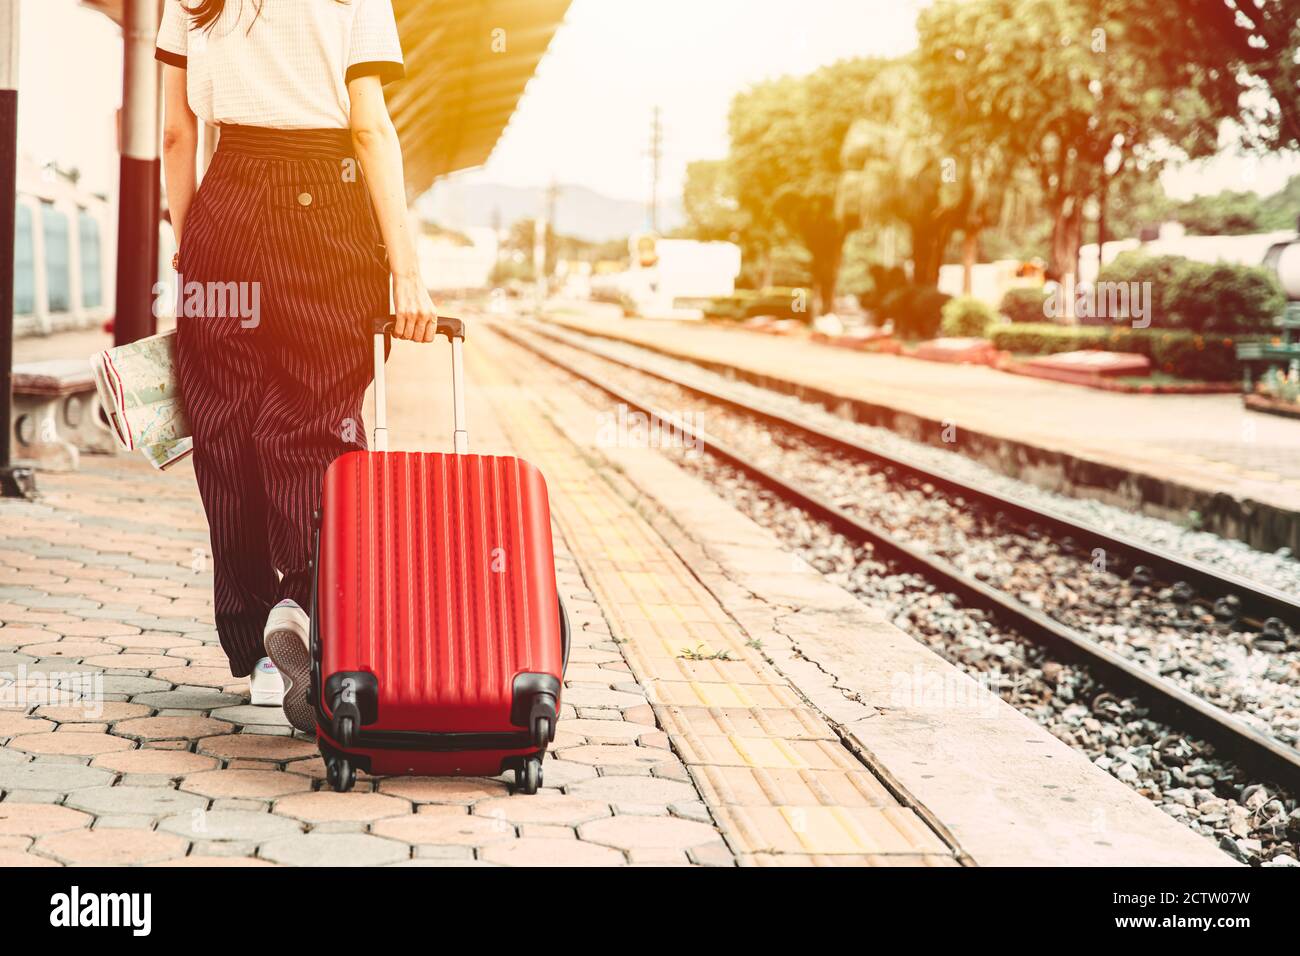 Tourist walking with their luggage in the train station to travel to somewhere for vacation after lockdown. Stock Photo